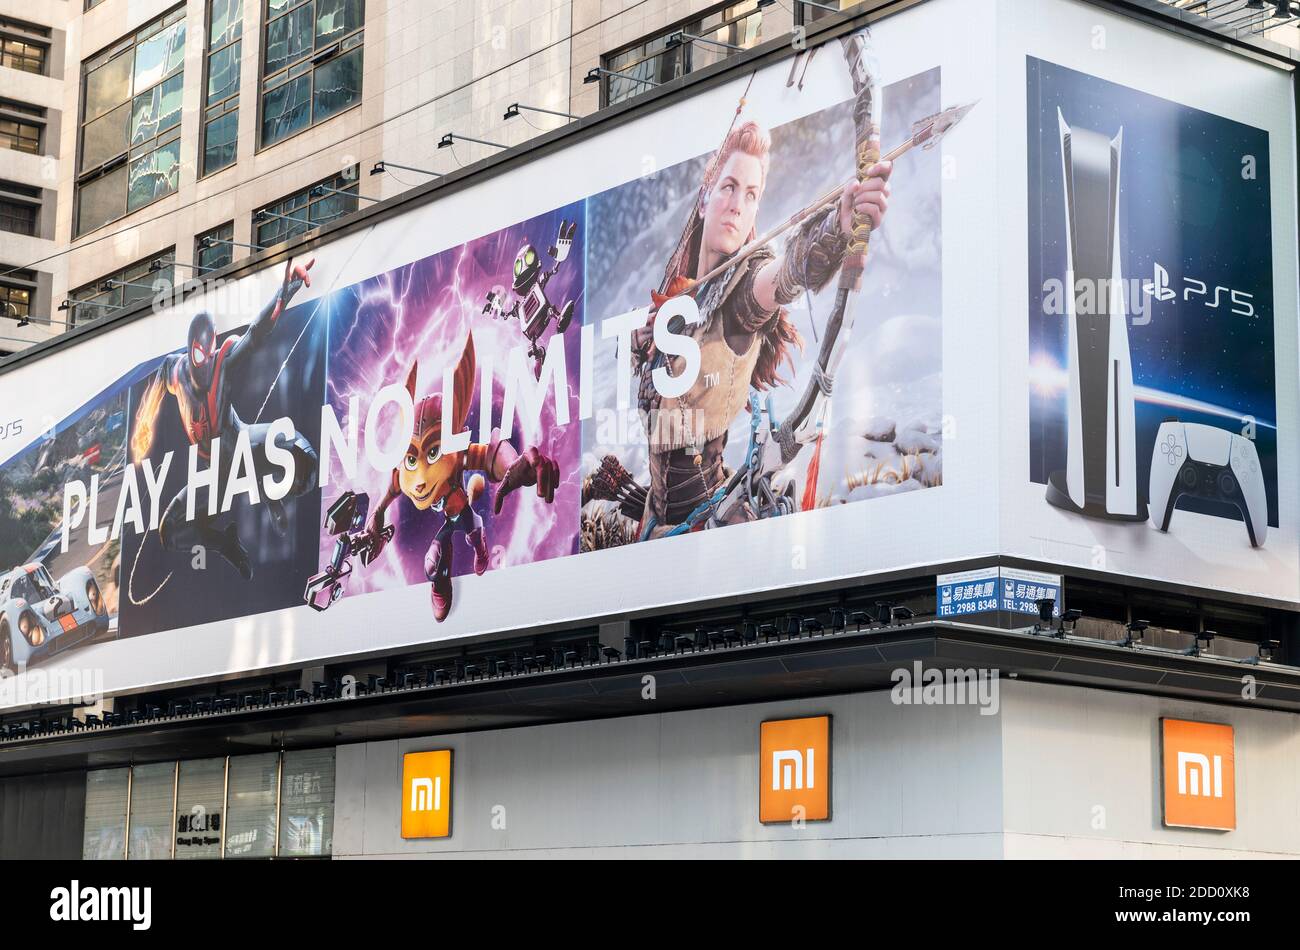 Japanese video gaming system brand created and owned by Sony Computer Entertainment, PlayStation advertisement billboard seen in Hong Stock Photo -